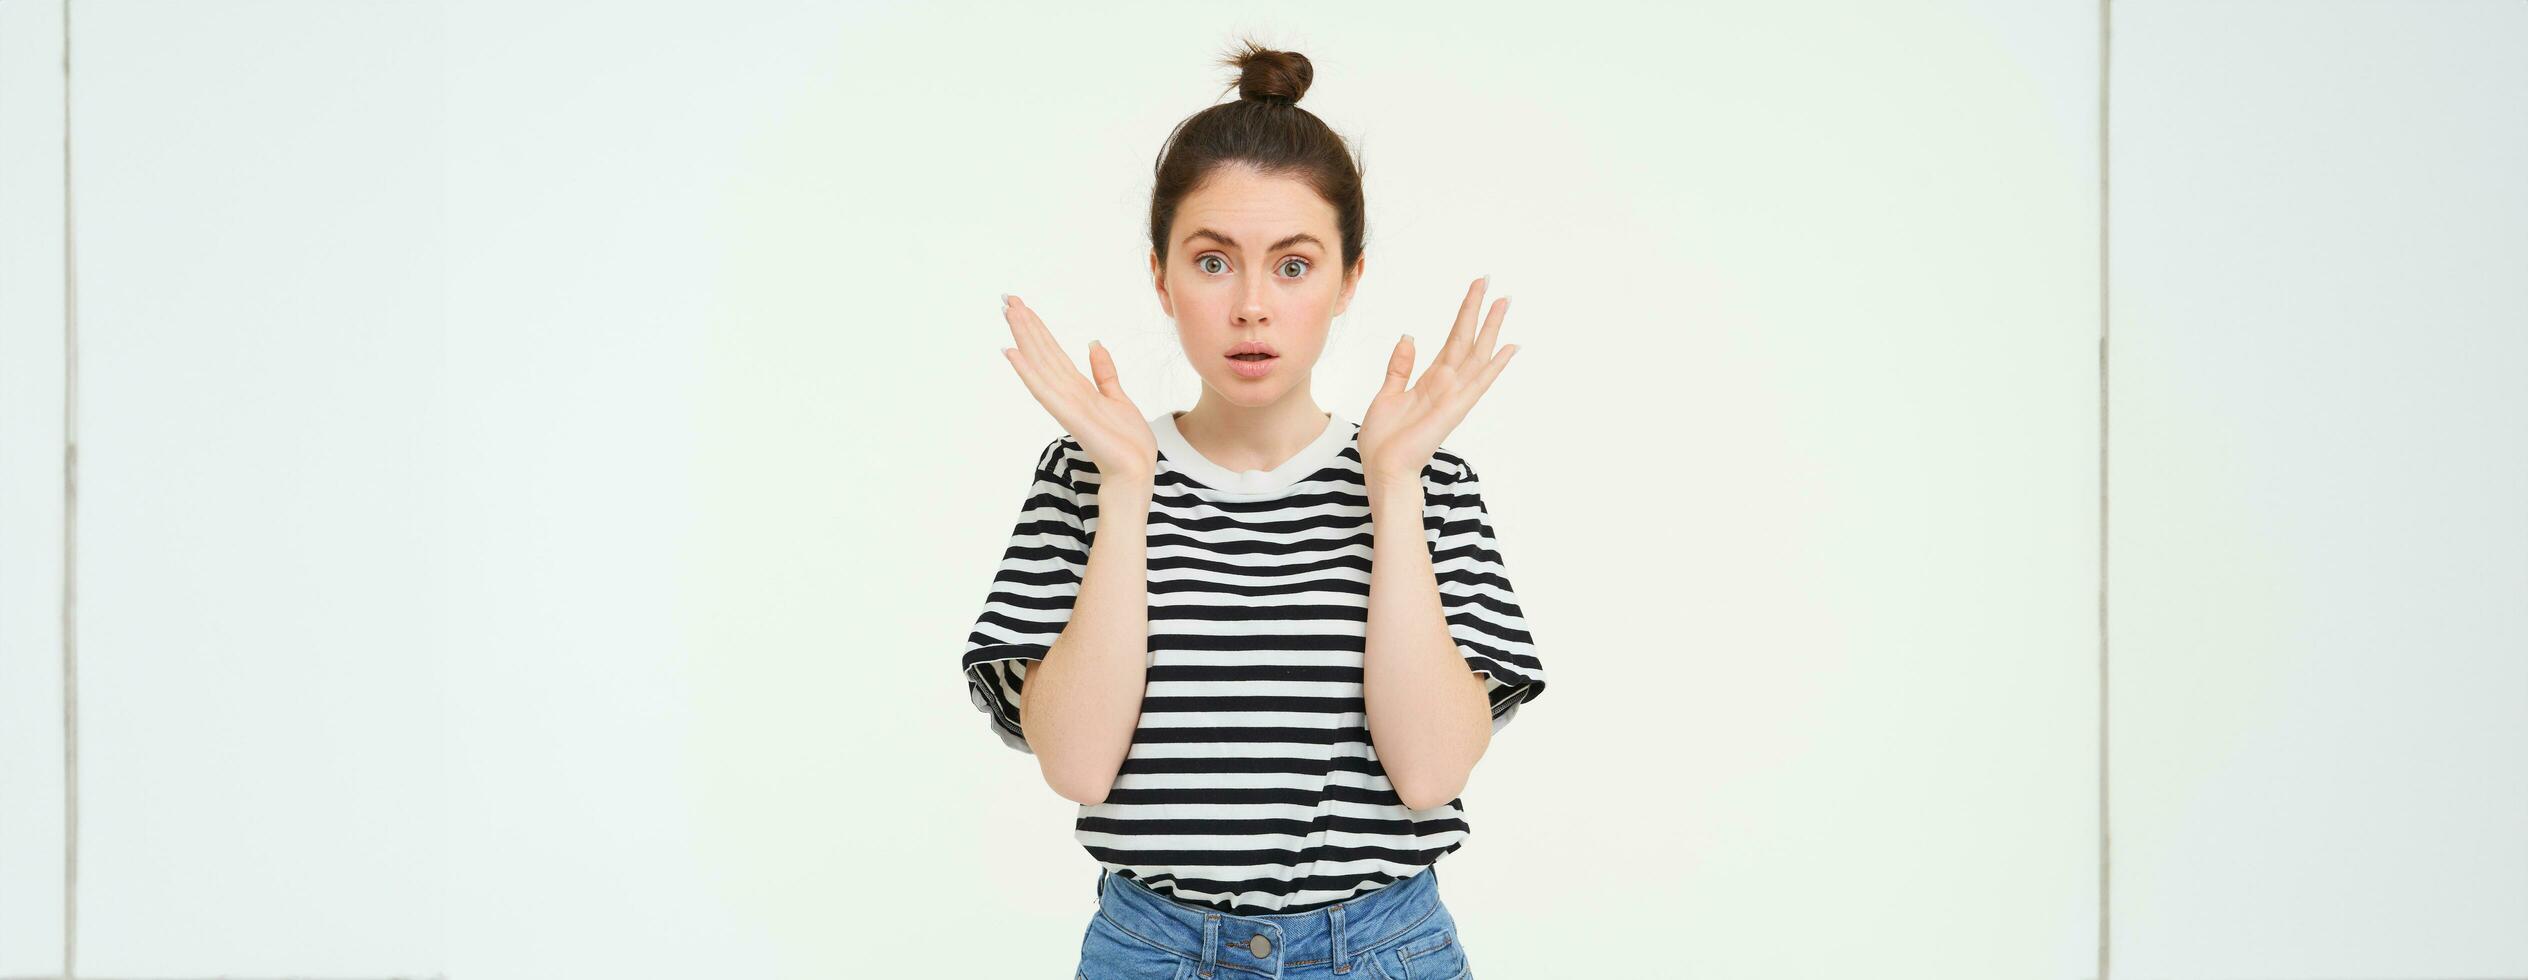 Portrait of surprised woman gasping, looking amazed, hear great news, drops jaw, says wow, impressed by something, stands over white background photo